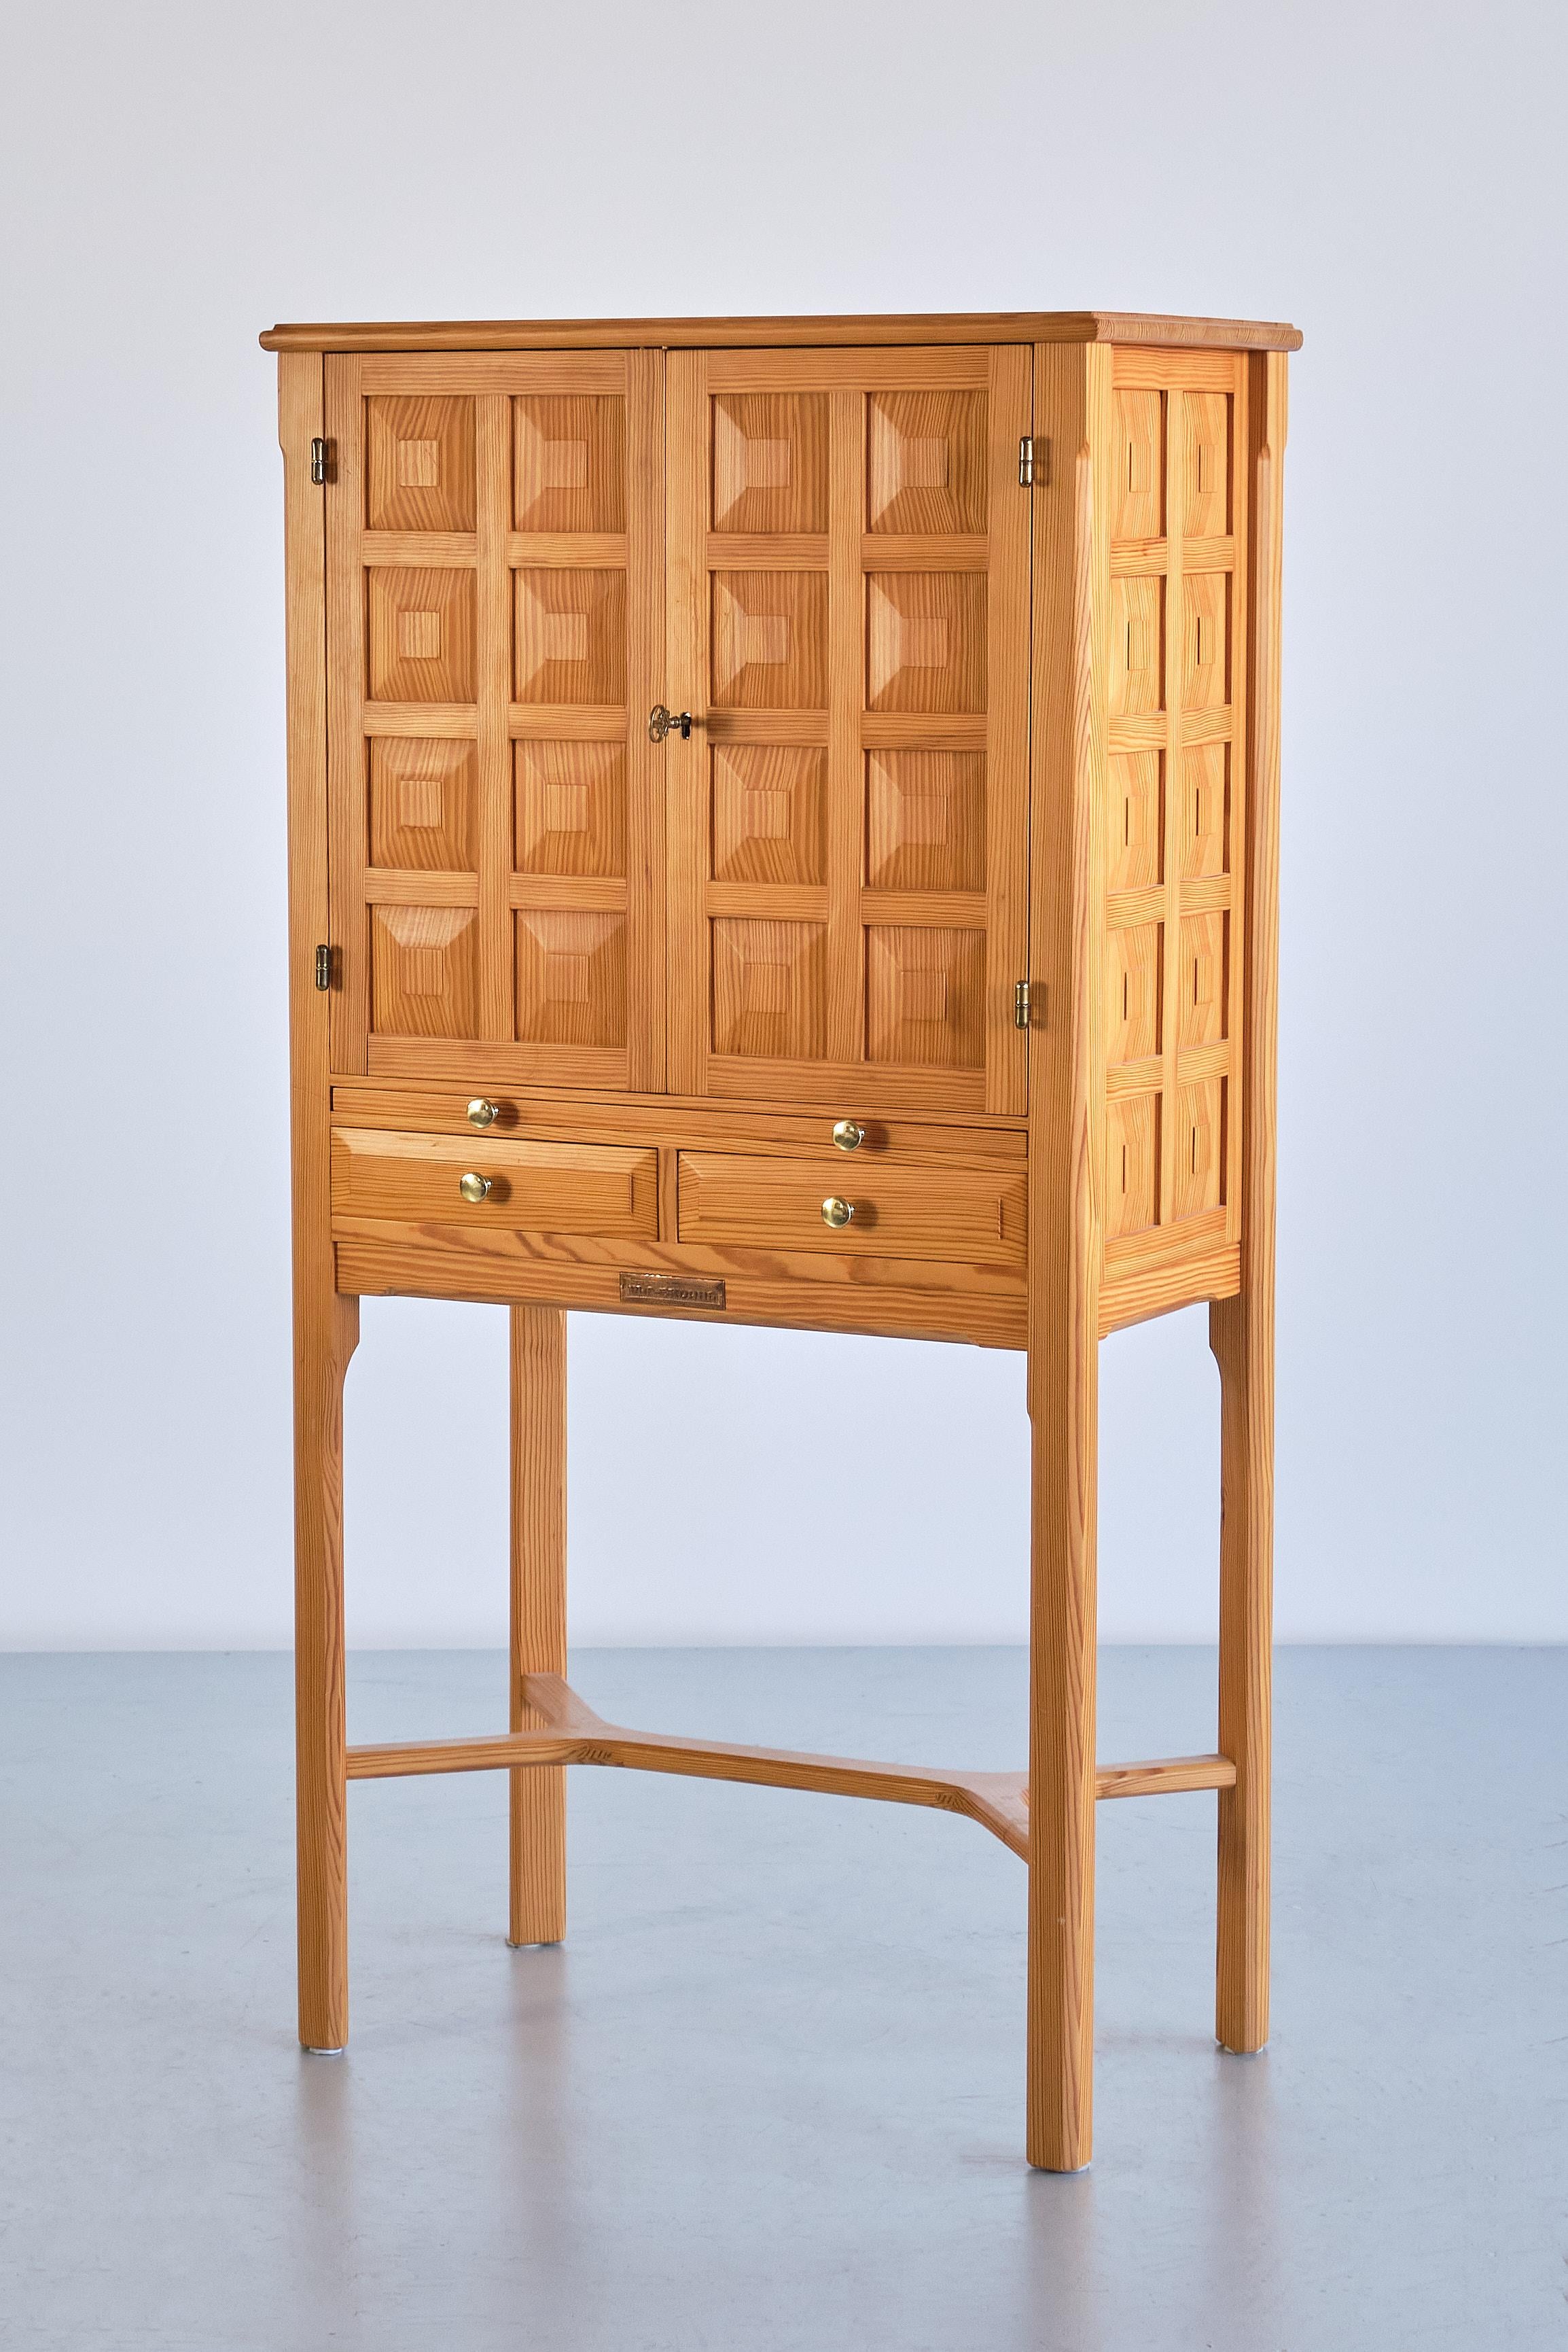 Late 20th Century Ulf Ekdahl Cabinet in Solid Pine Wood and Brass, Nybro, Sweden, 1979 For Sale